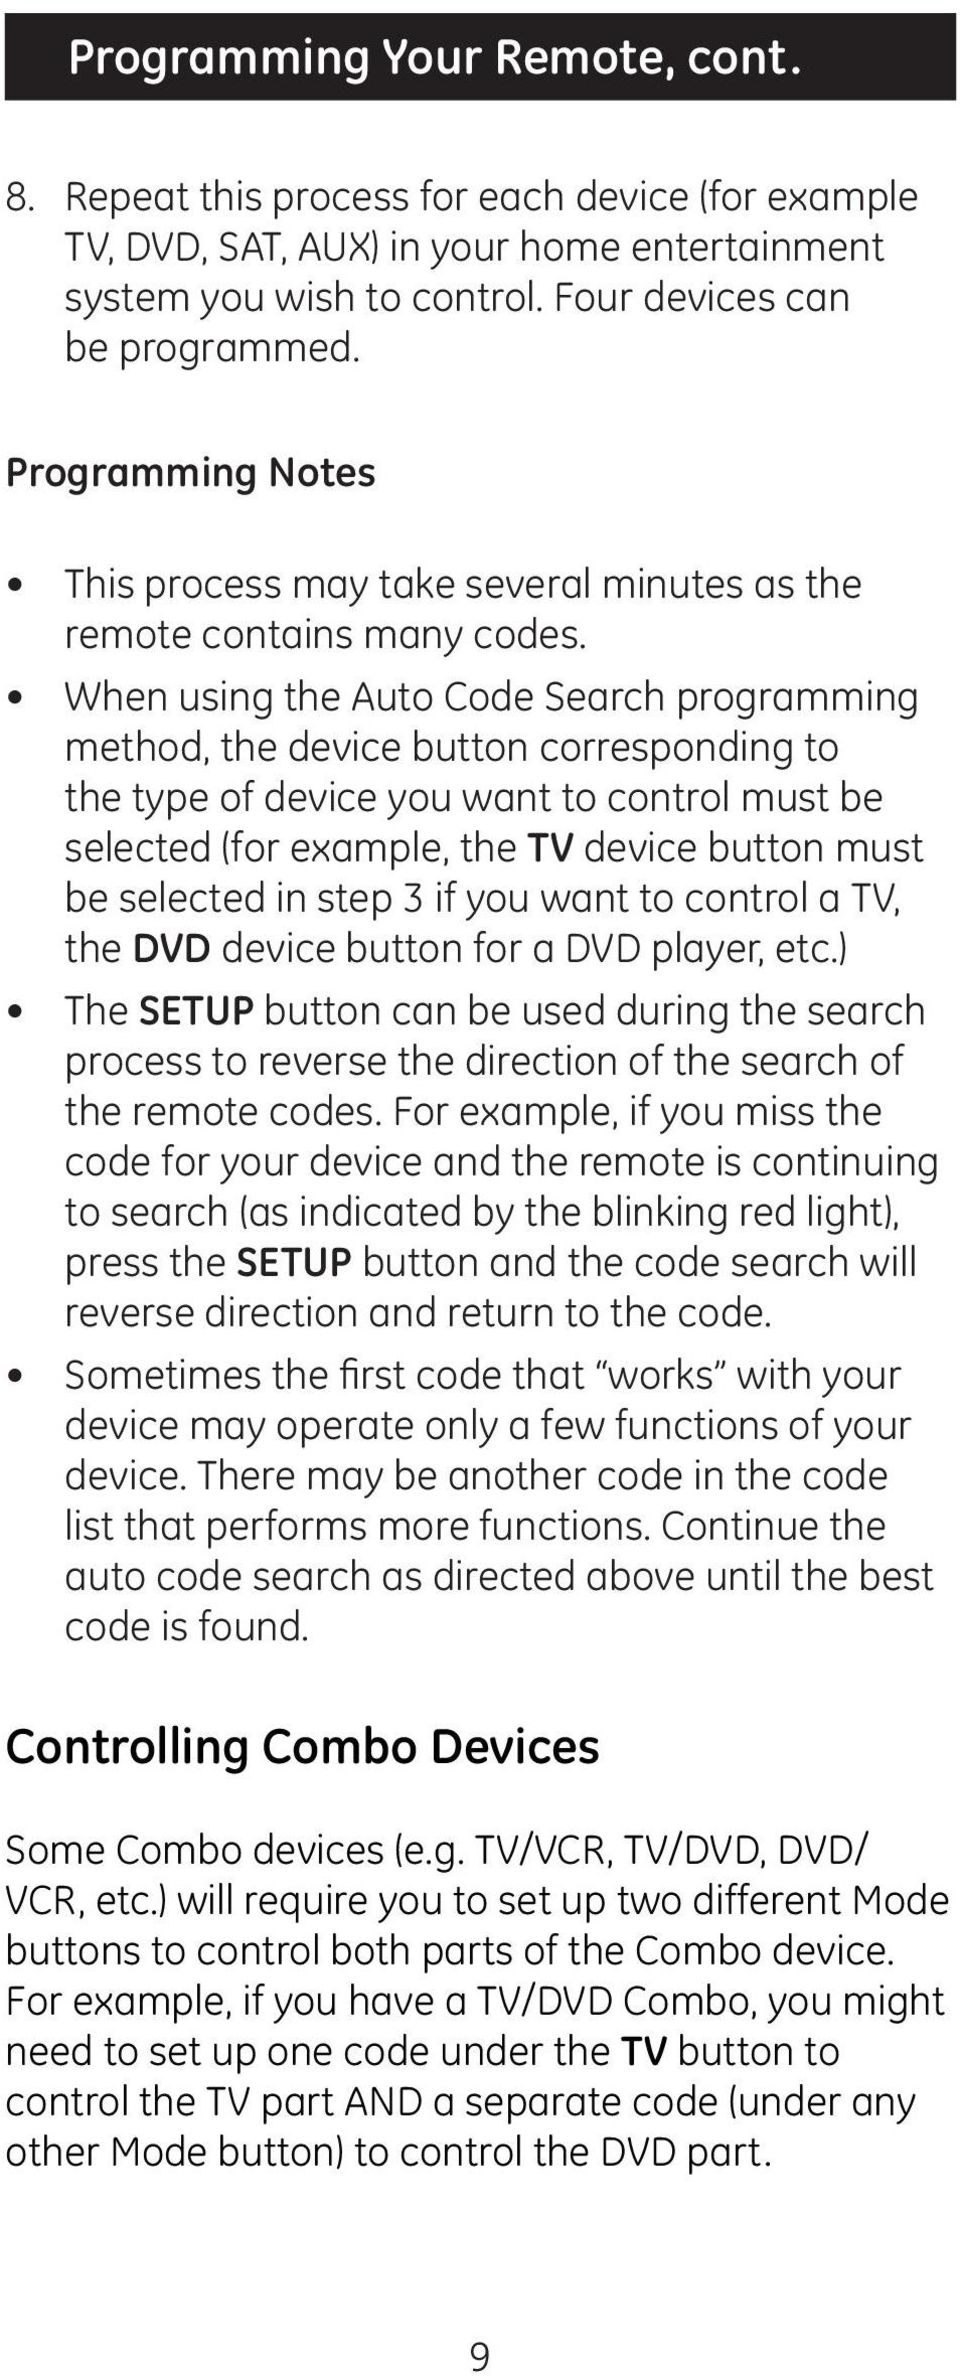 When using the Auto Code Search programming method, the device button corresponding to the type of device you want to control must be selected (for example, the TV device button must be selected in